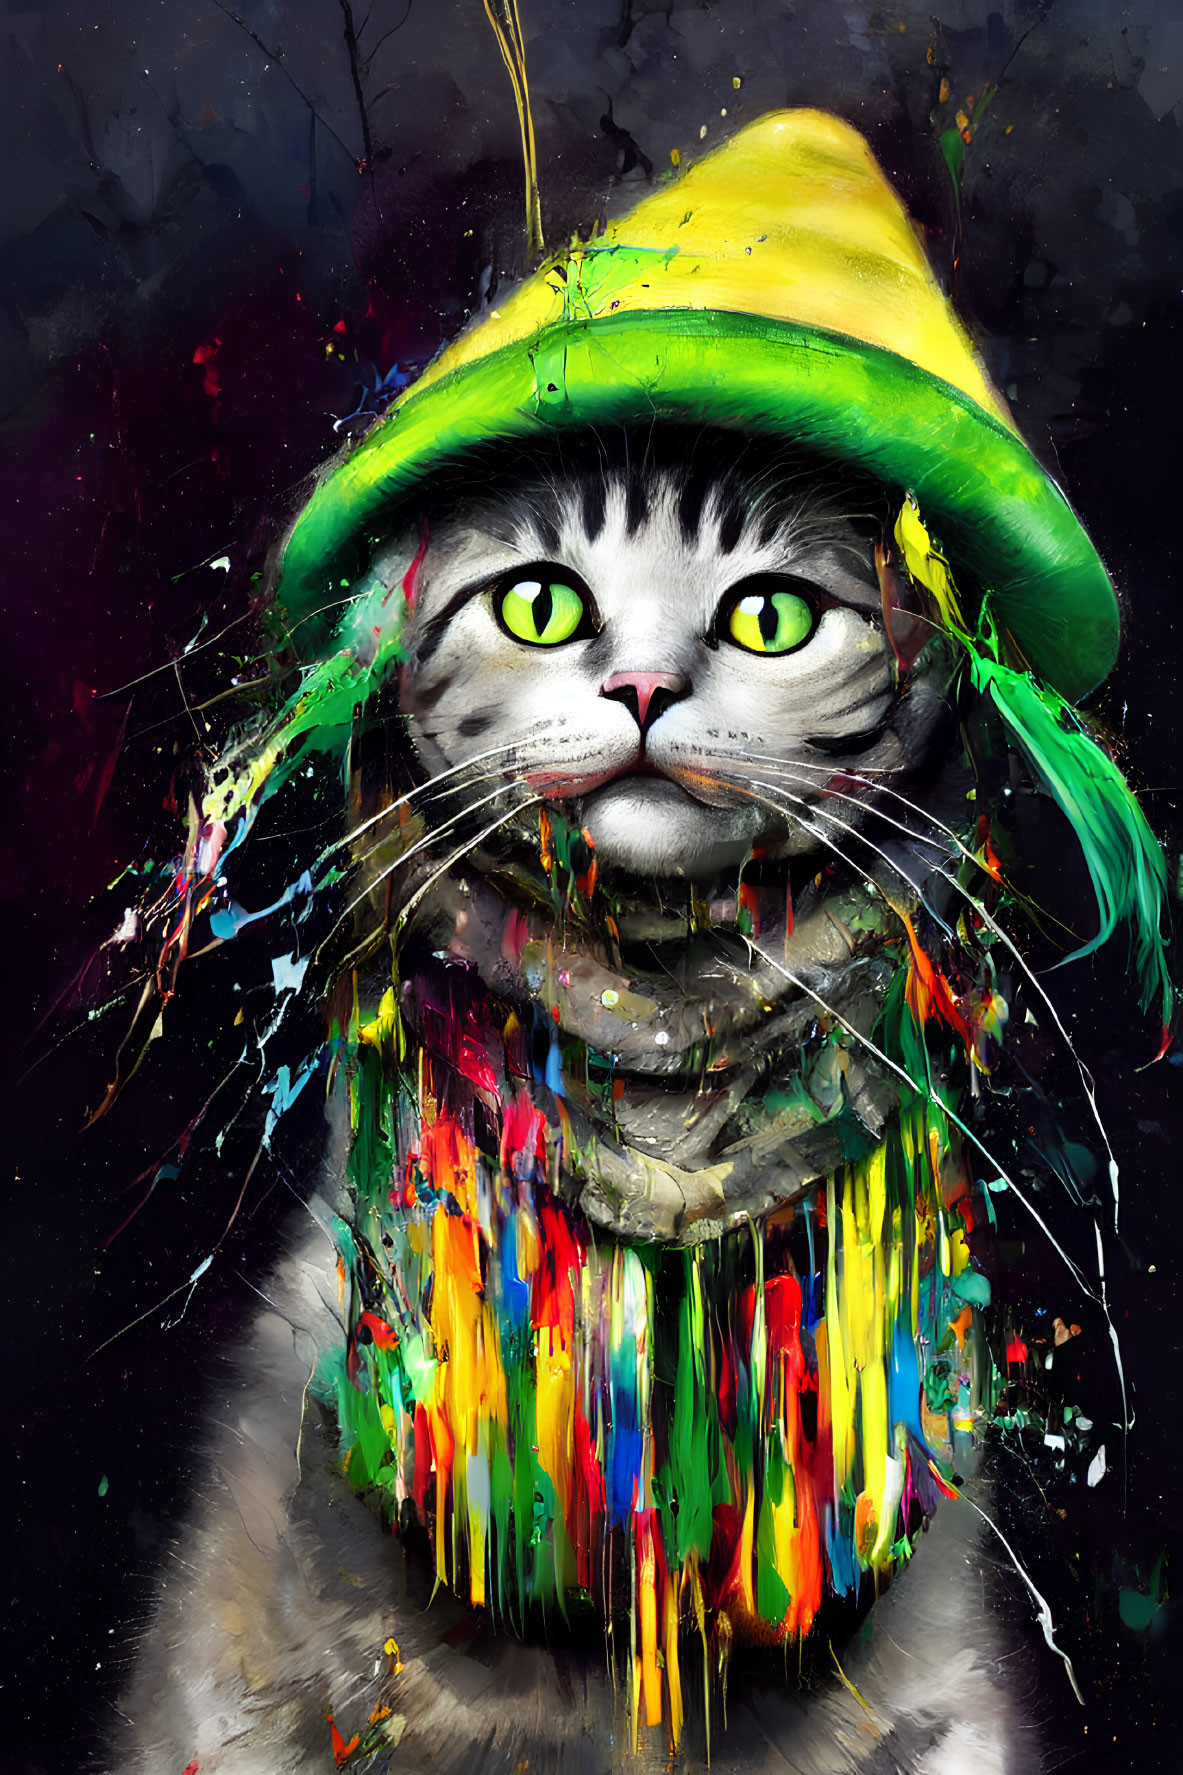 Vibrant digital artwork: Cat in yellow hat and scarf with colorful paint splatters